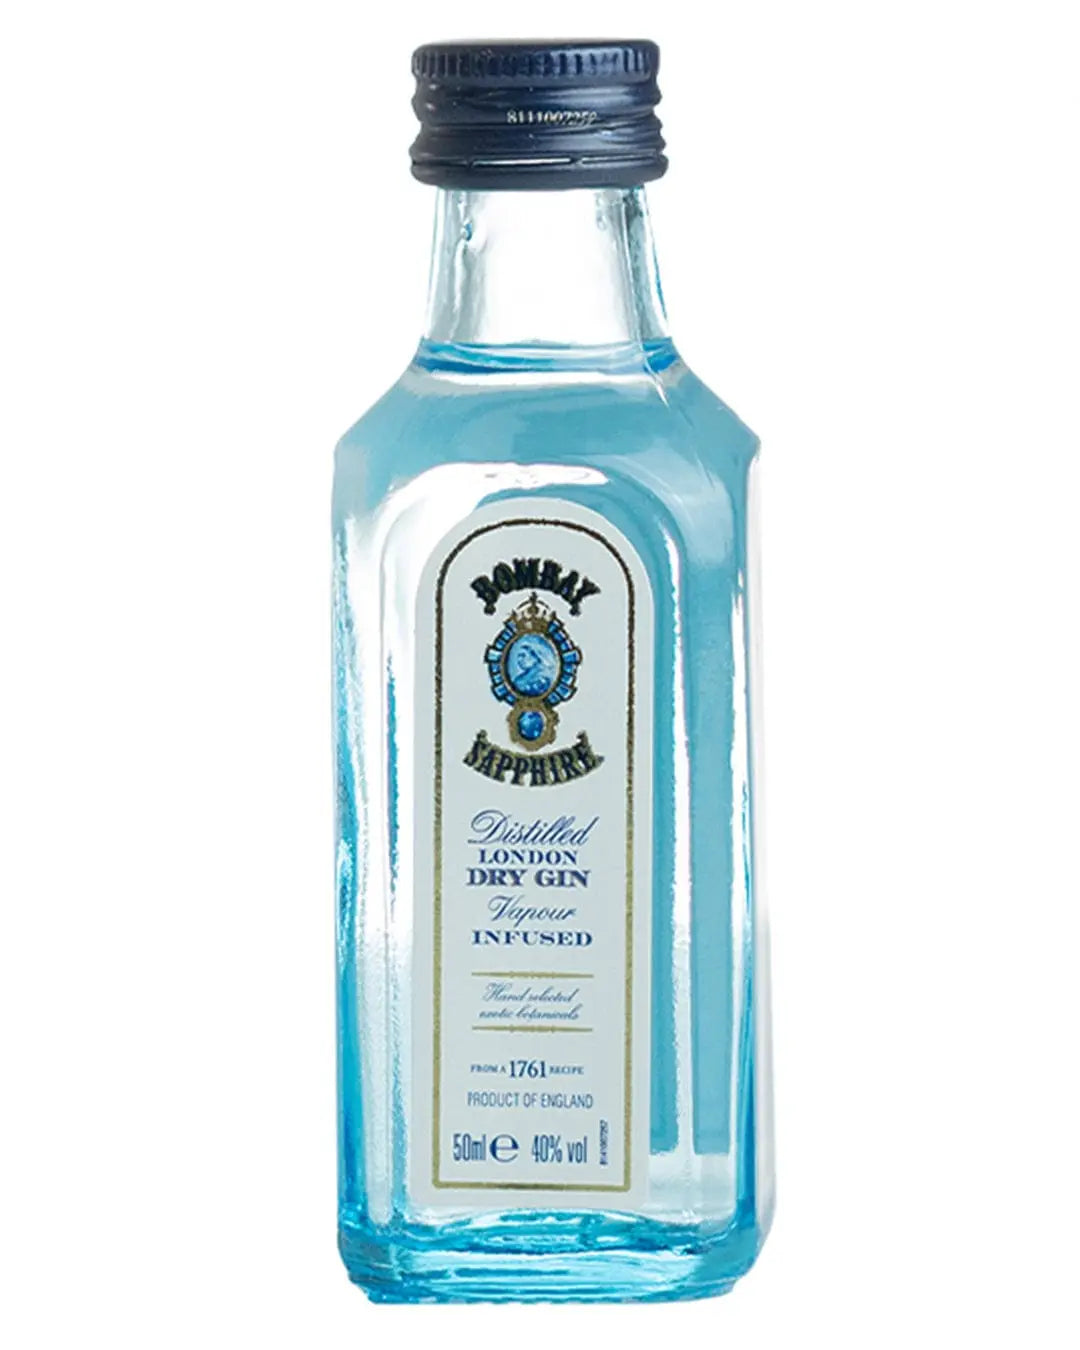 The Bombay Gin – cl 5 Bottle Sapphire Miniature, Club